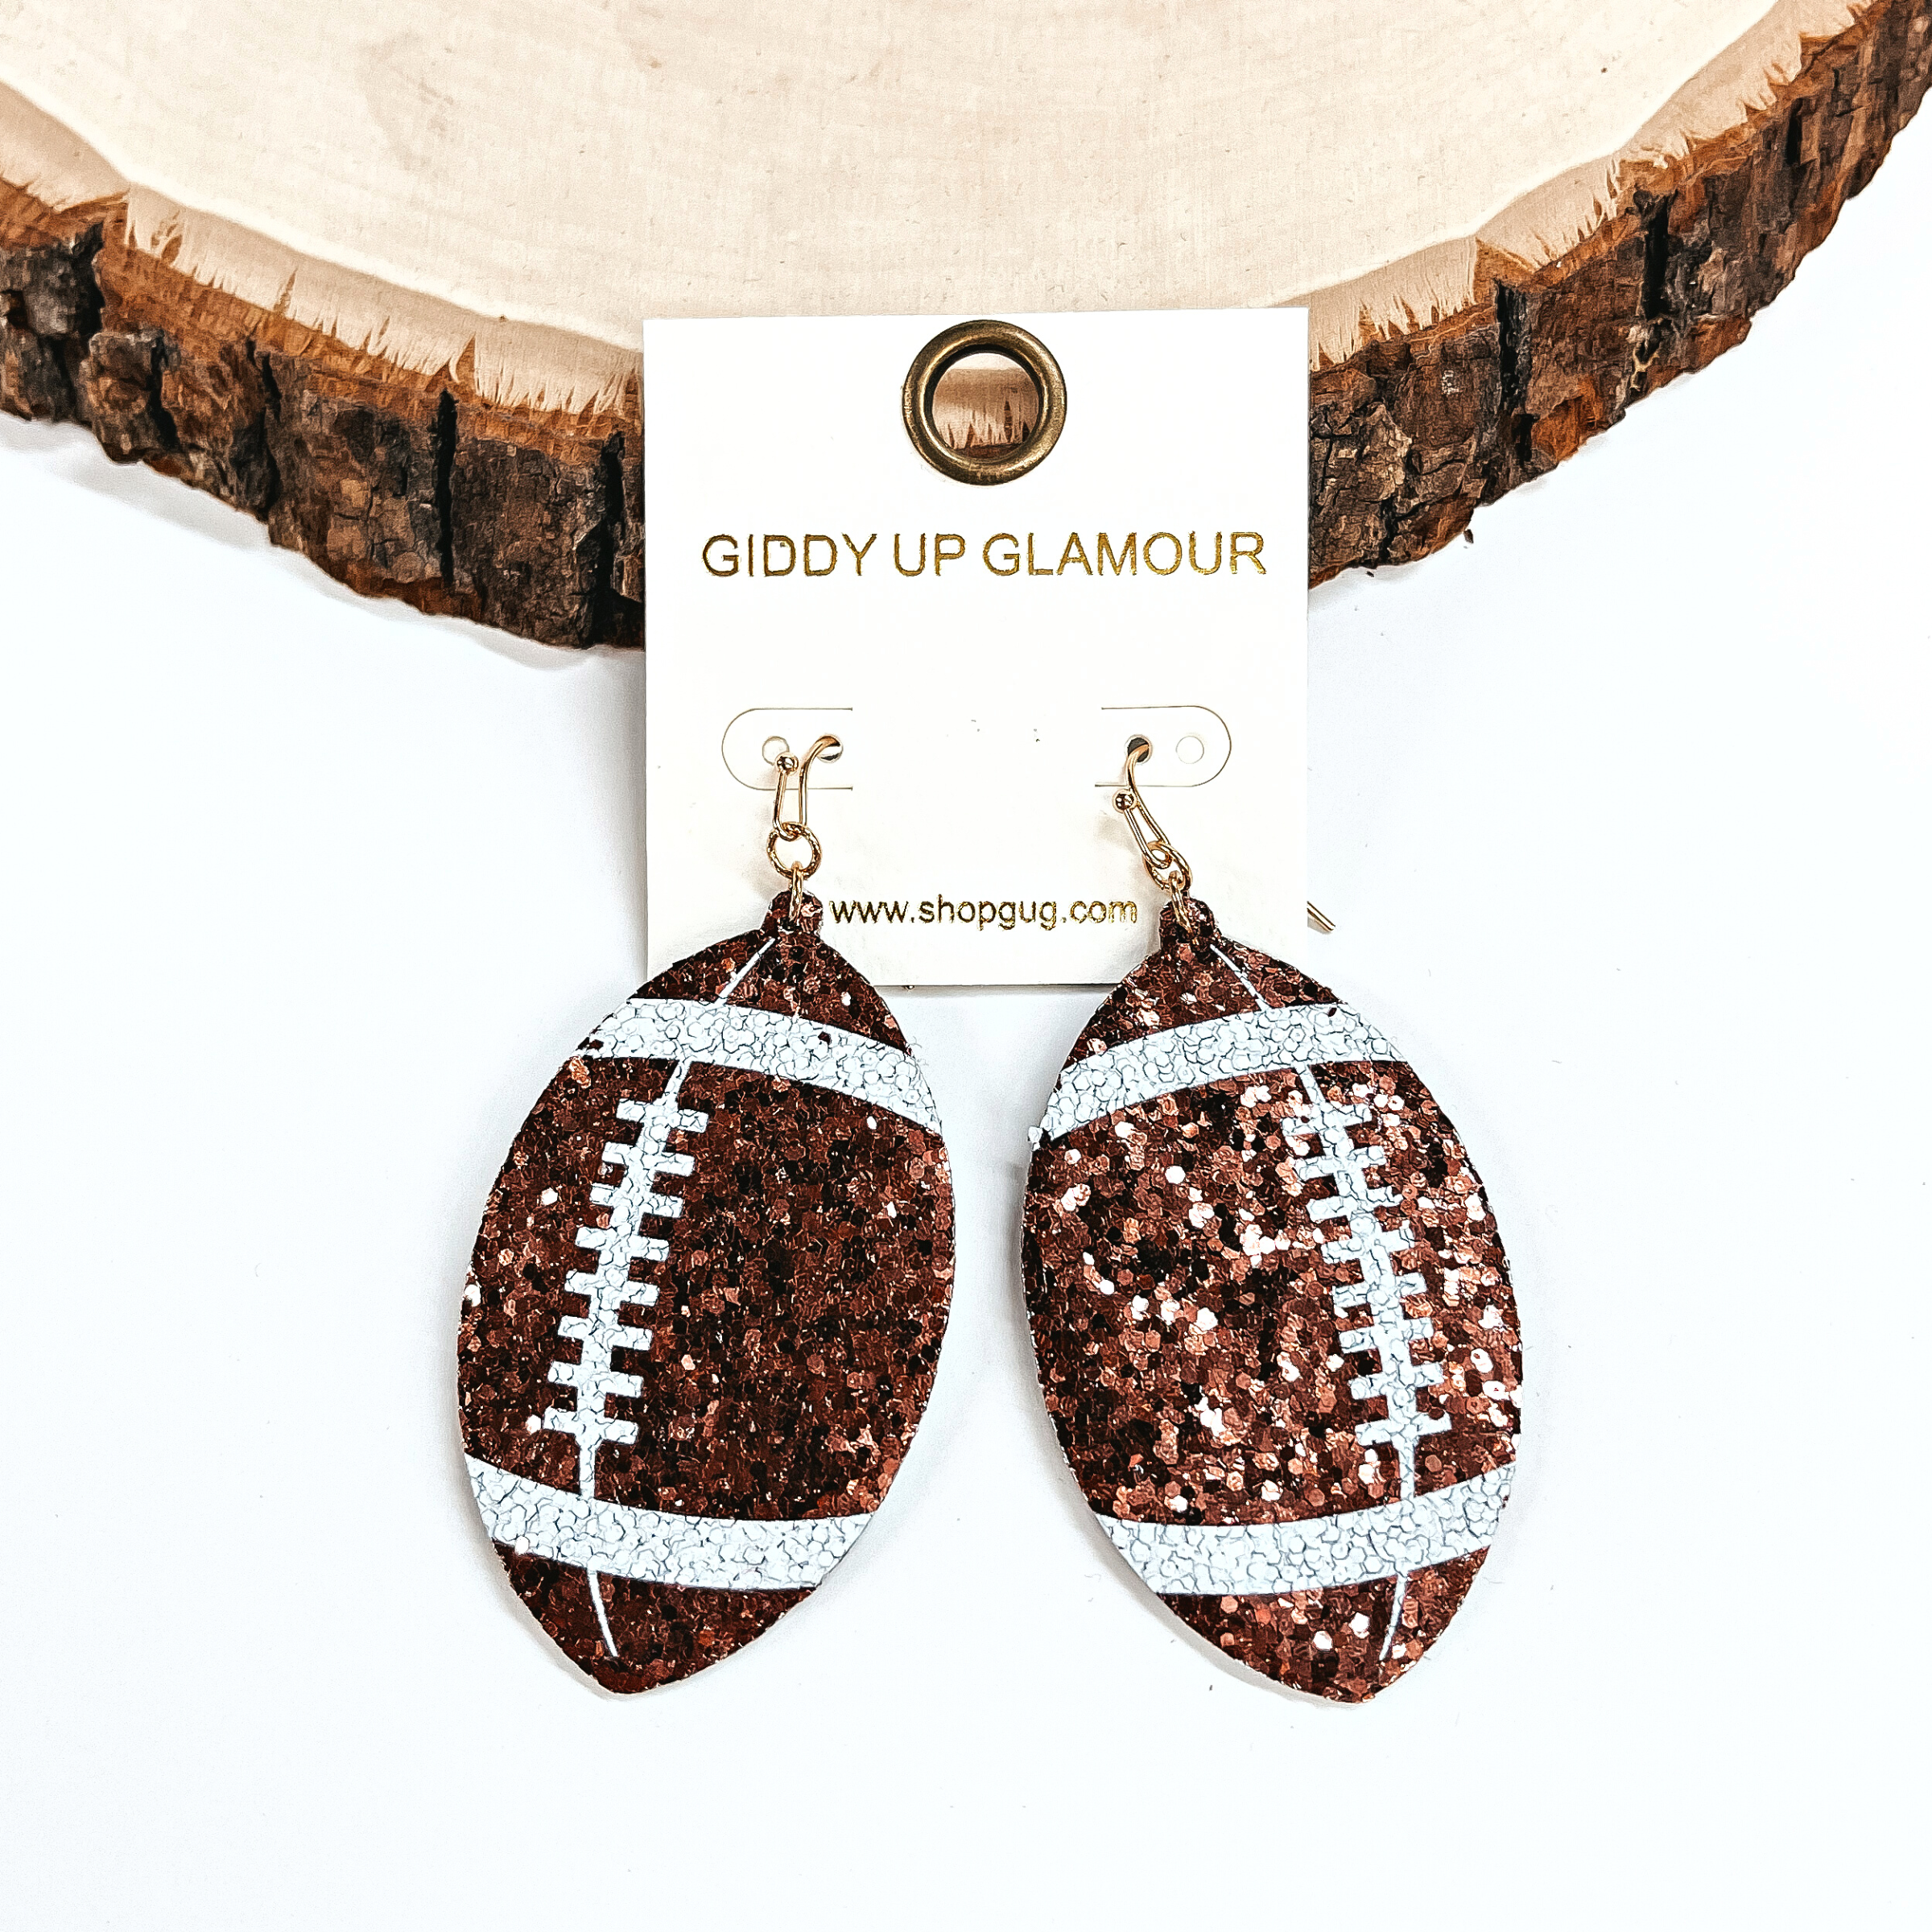 These are football shaped earrings in sequins in brown and white. These earrings are leaning against a slab of wood and on a white background.